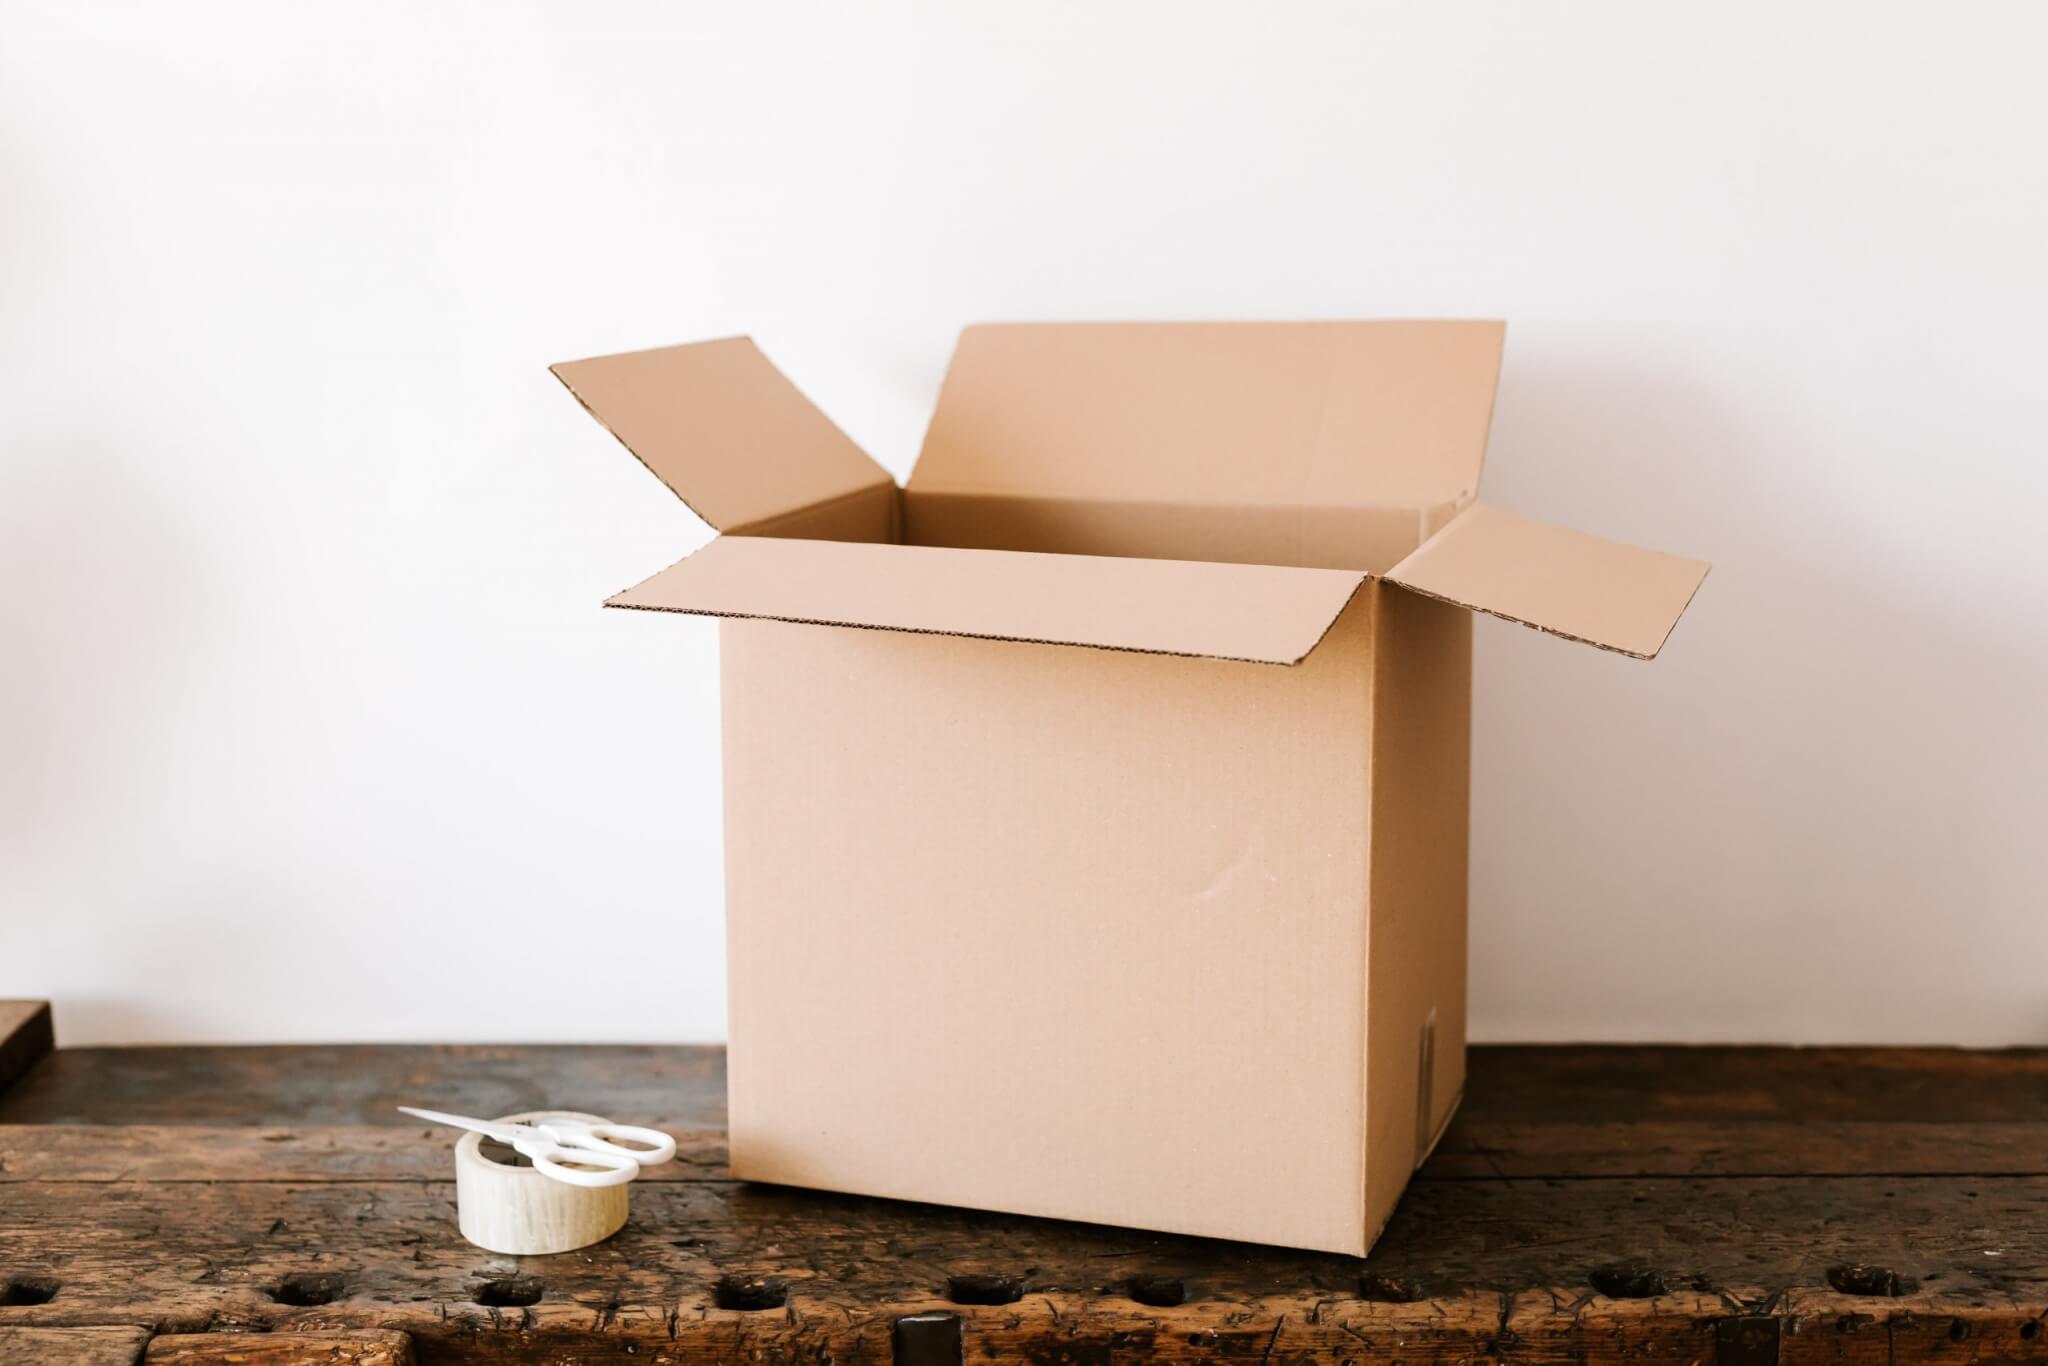 Do You Know What to Do With Your Used Moving Boxes?